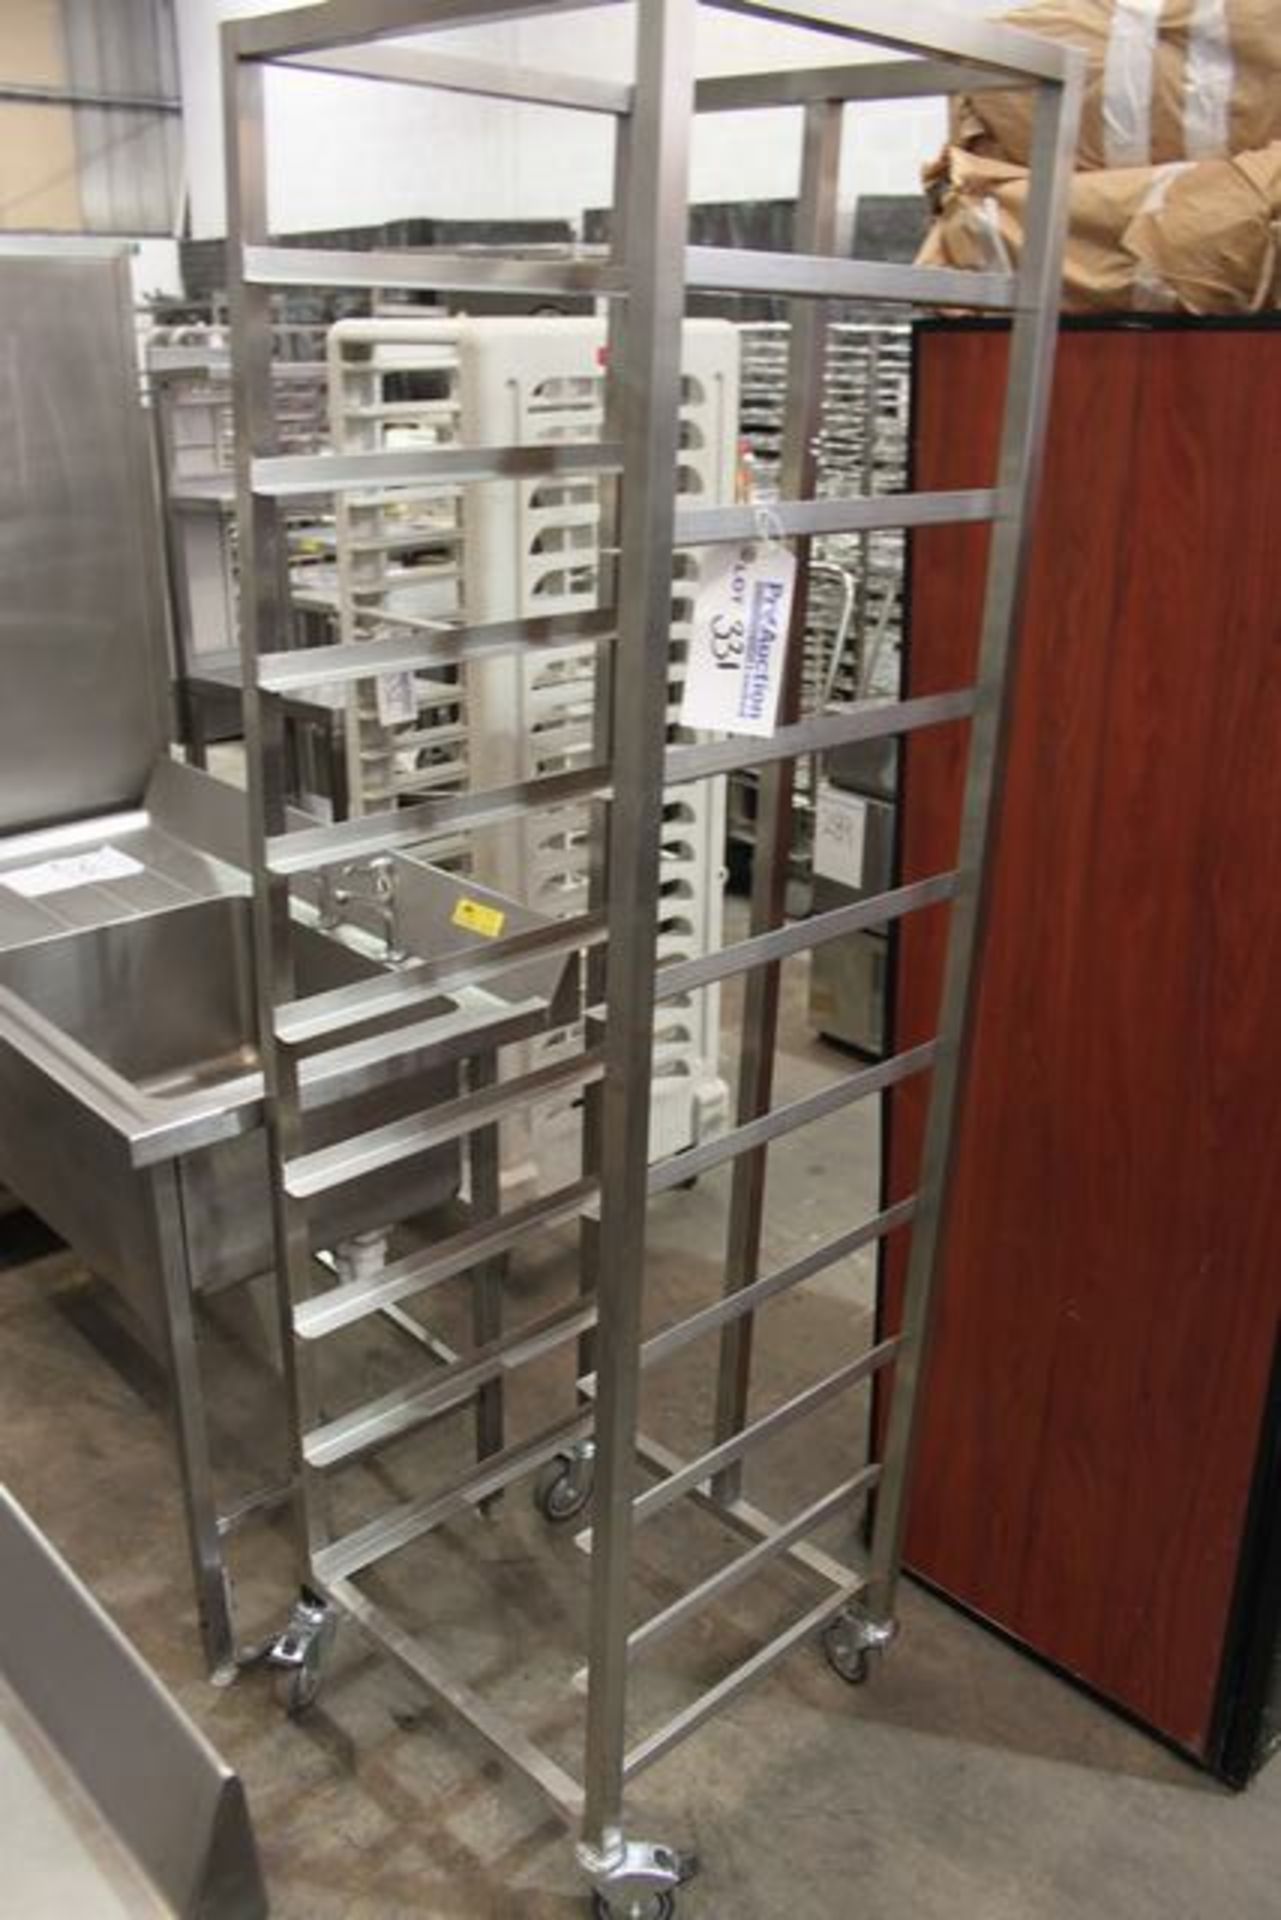 2 x Stainless steel mobile trolley for food trays commercial kitchens 9 rails - 18/10 stainless